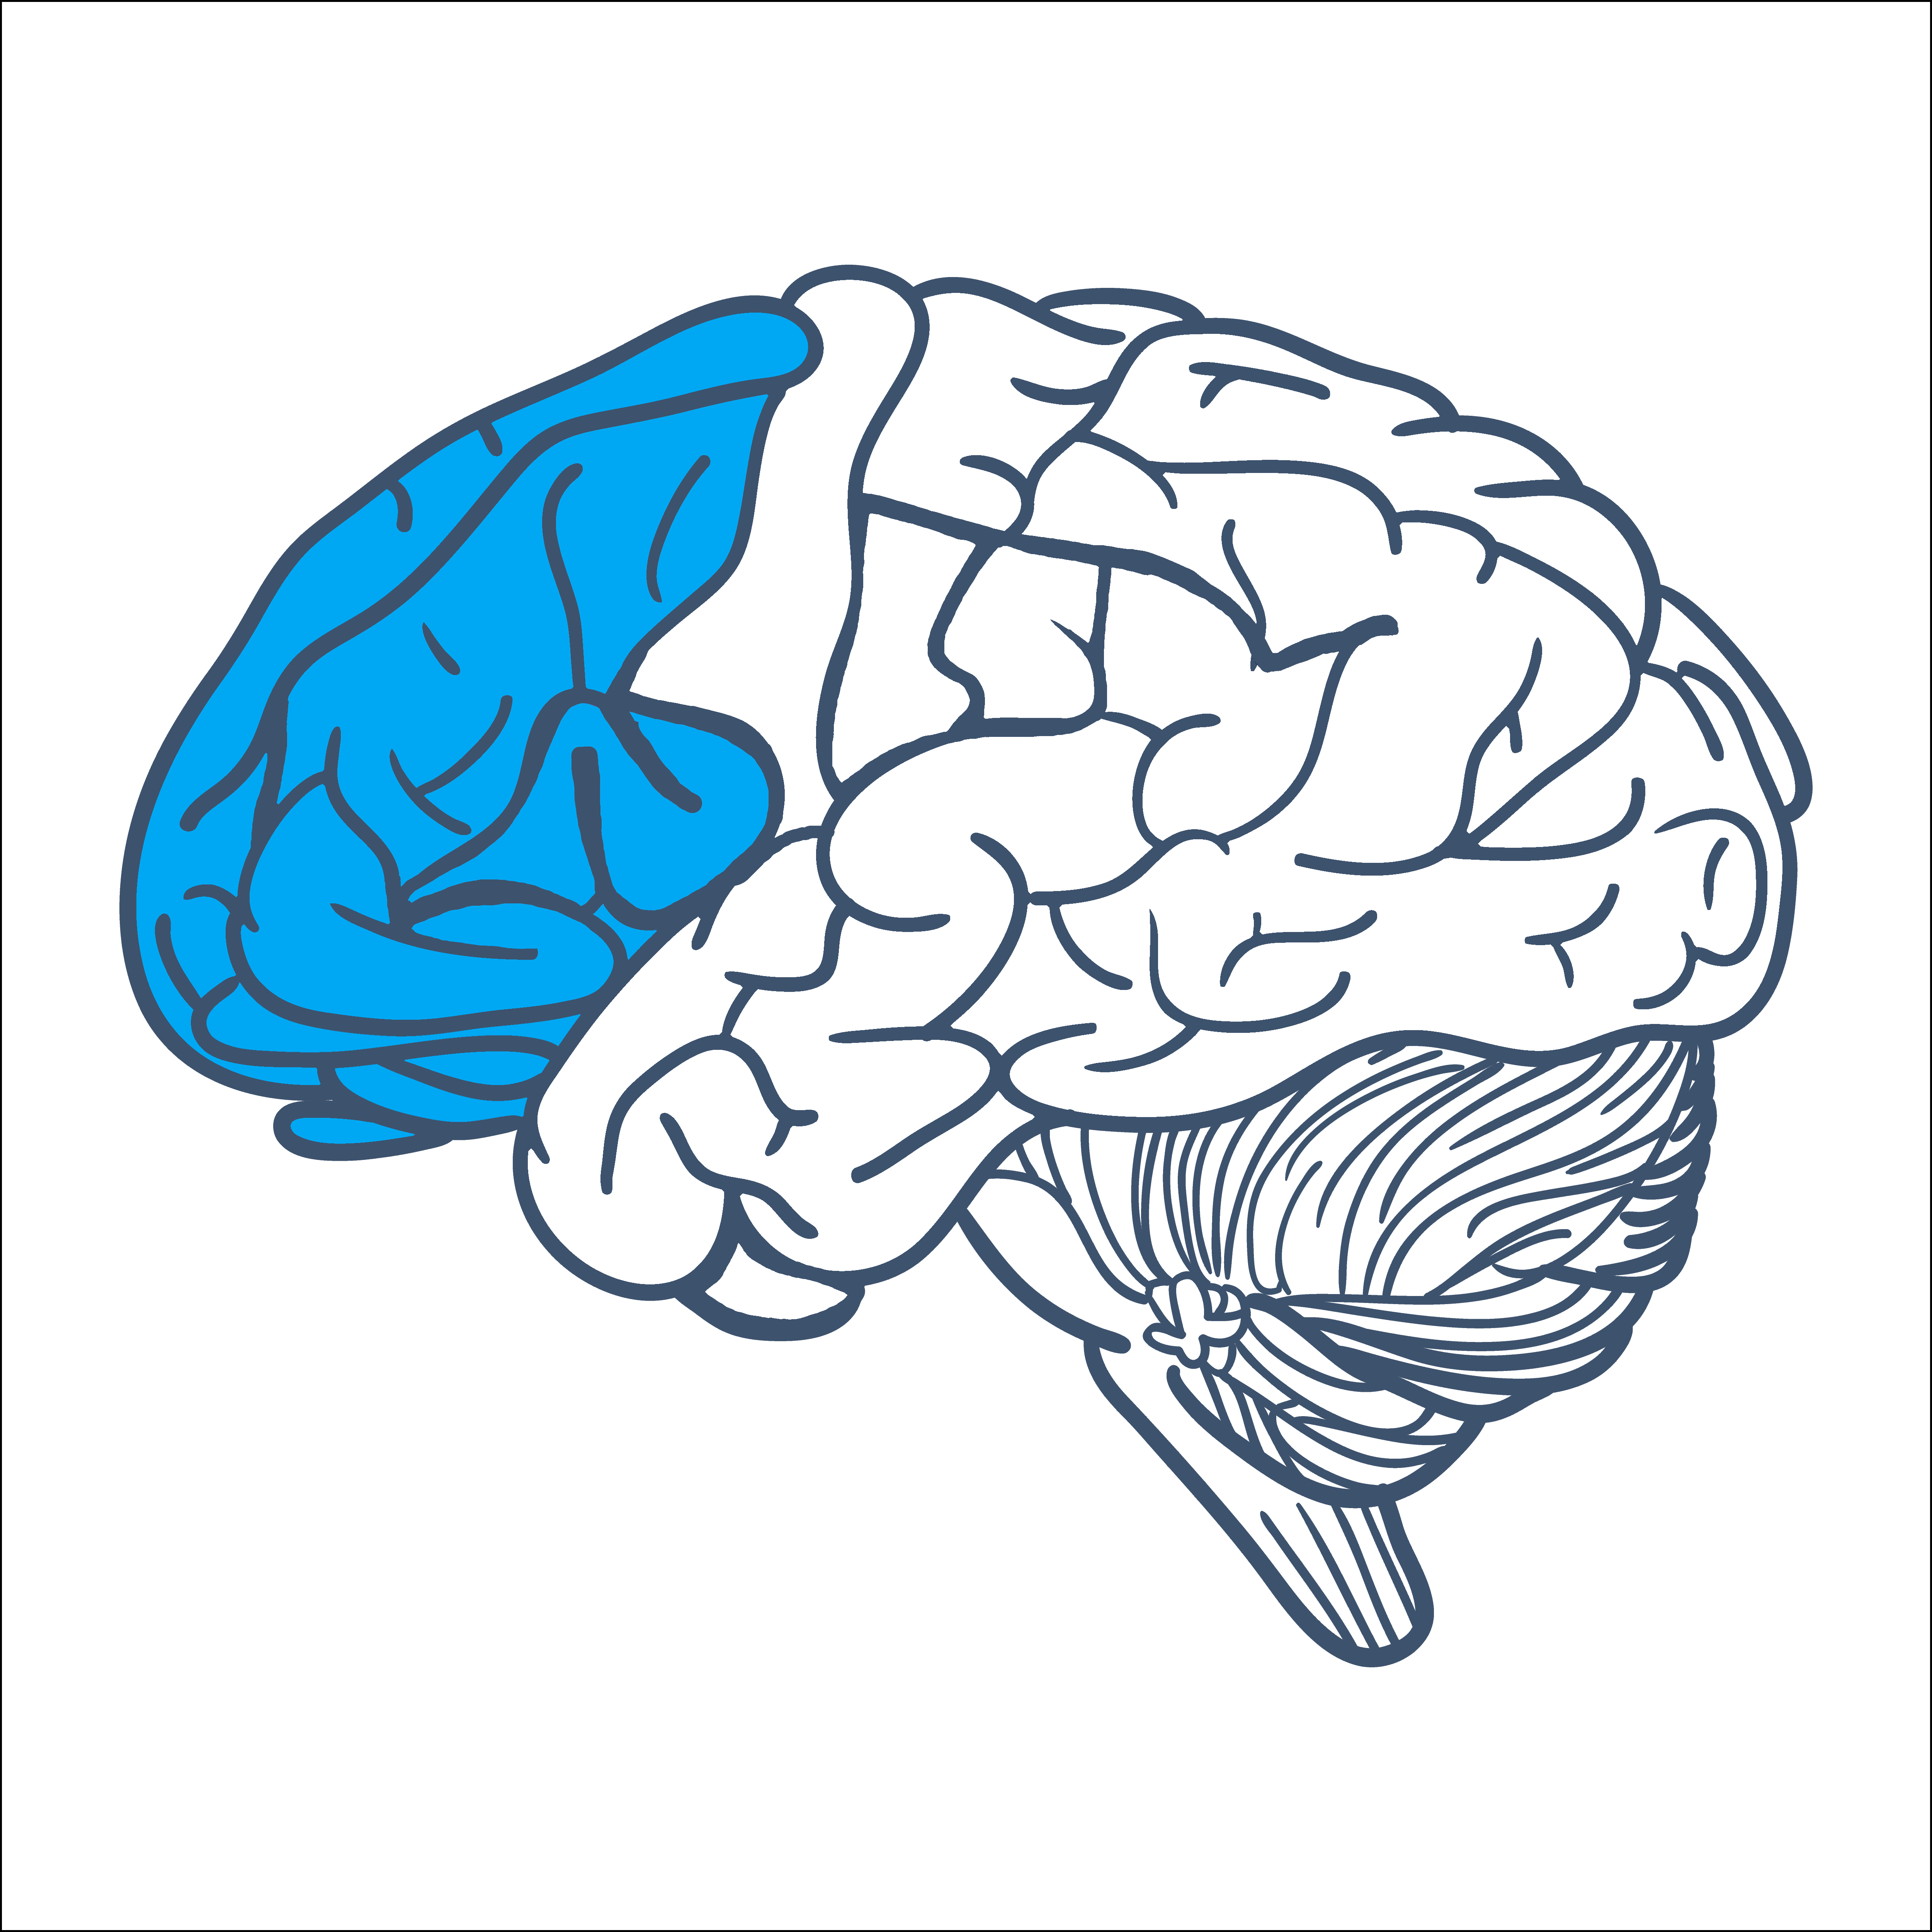 blue coloring on the strategic part of the brain